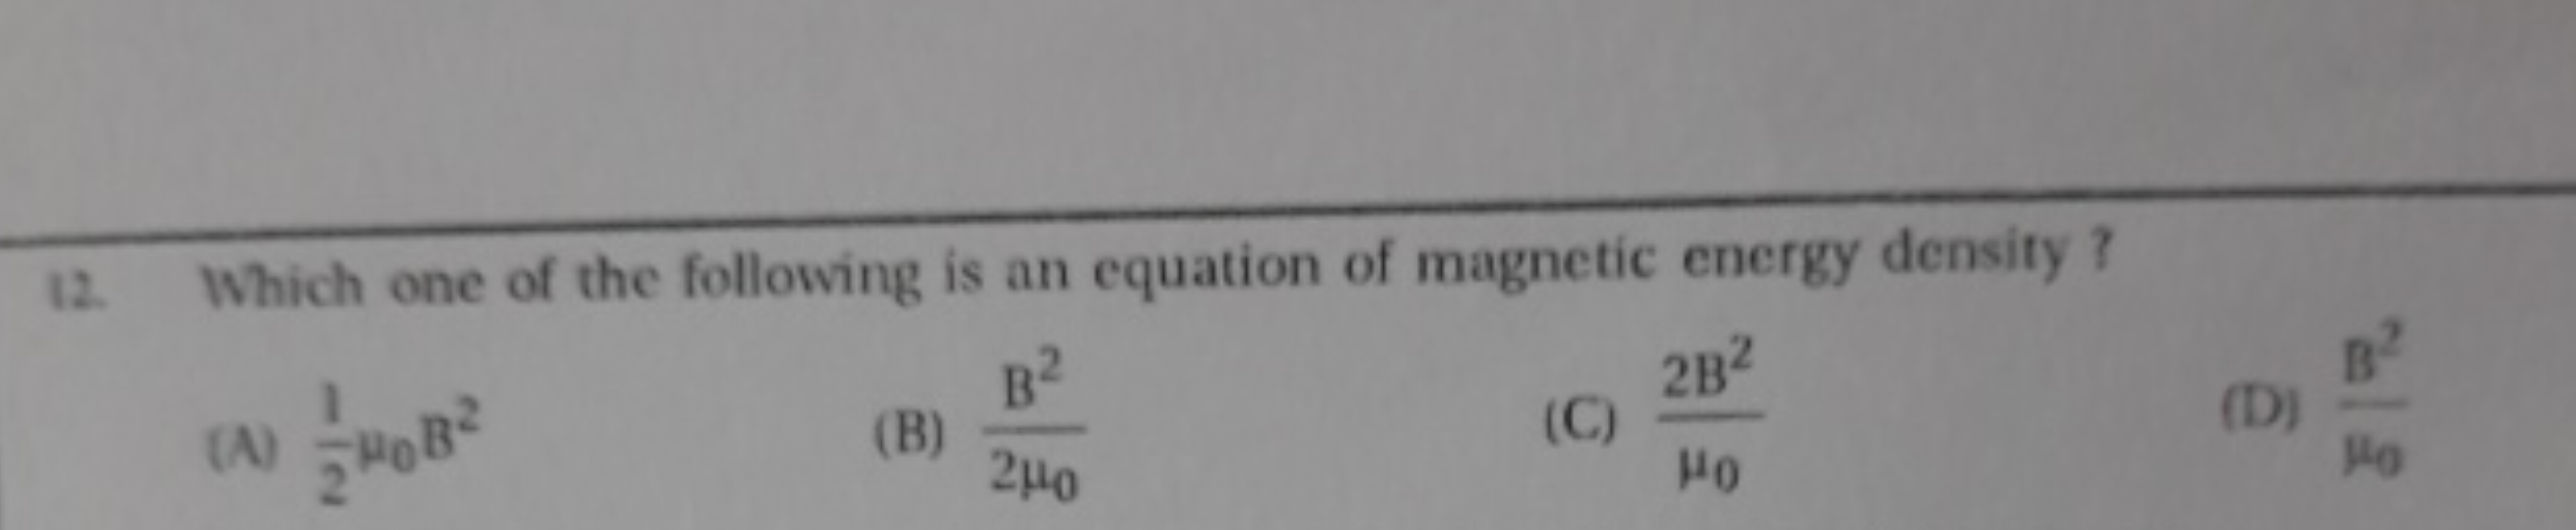 Which one of the following is an equation of magnetic energy density ?